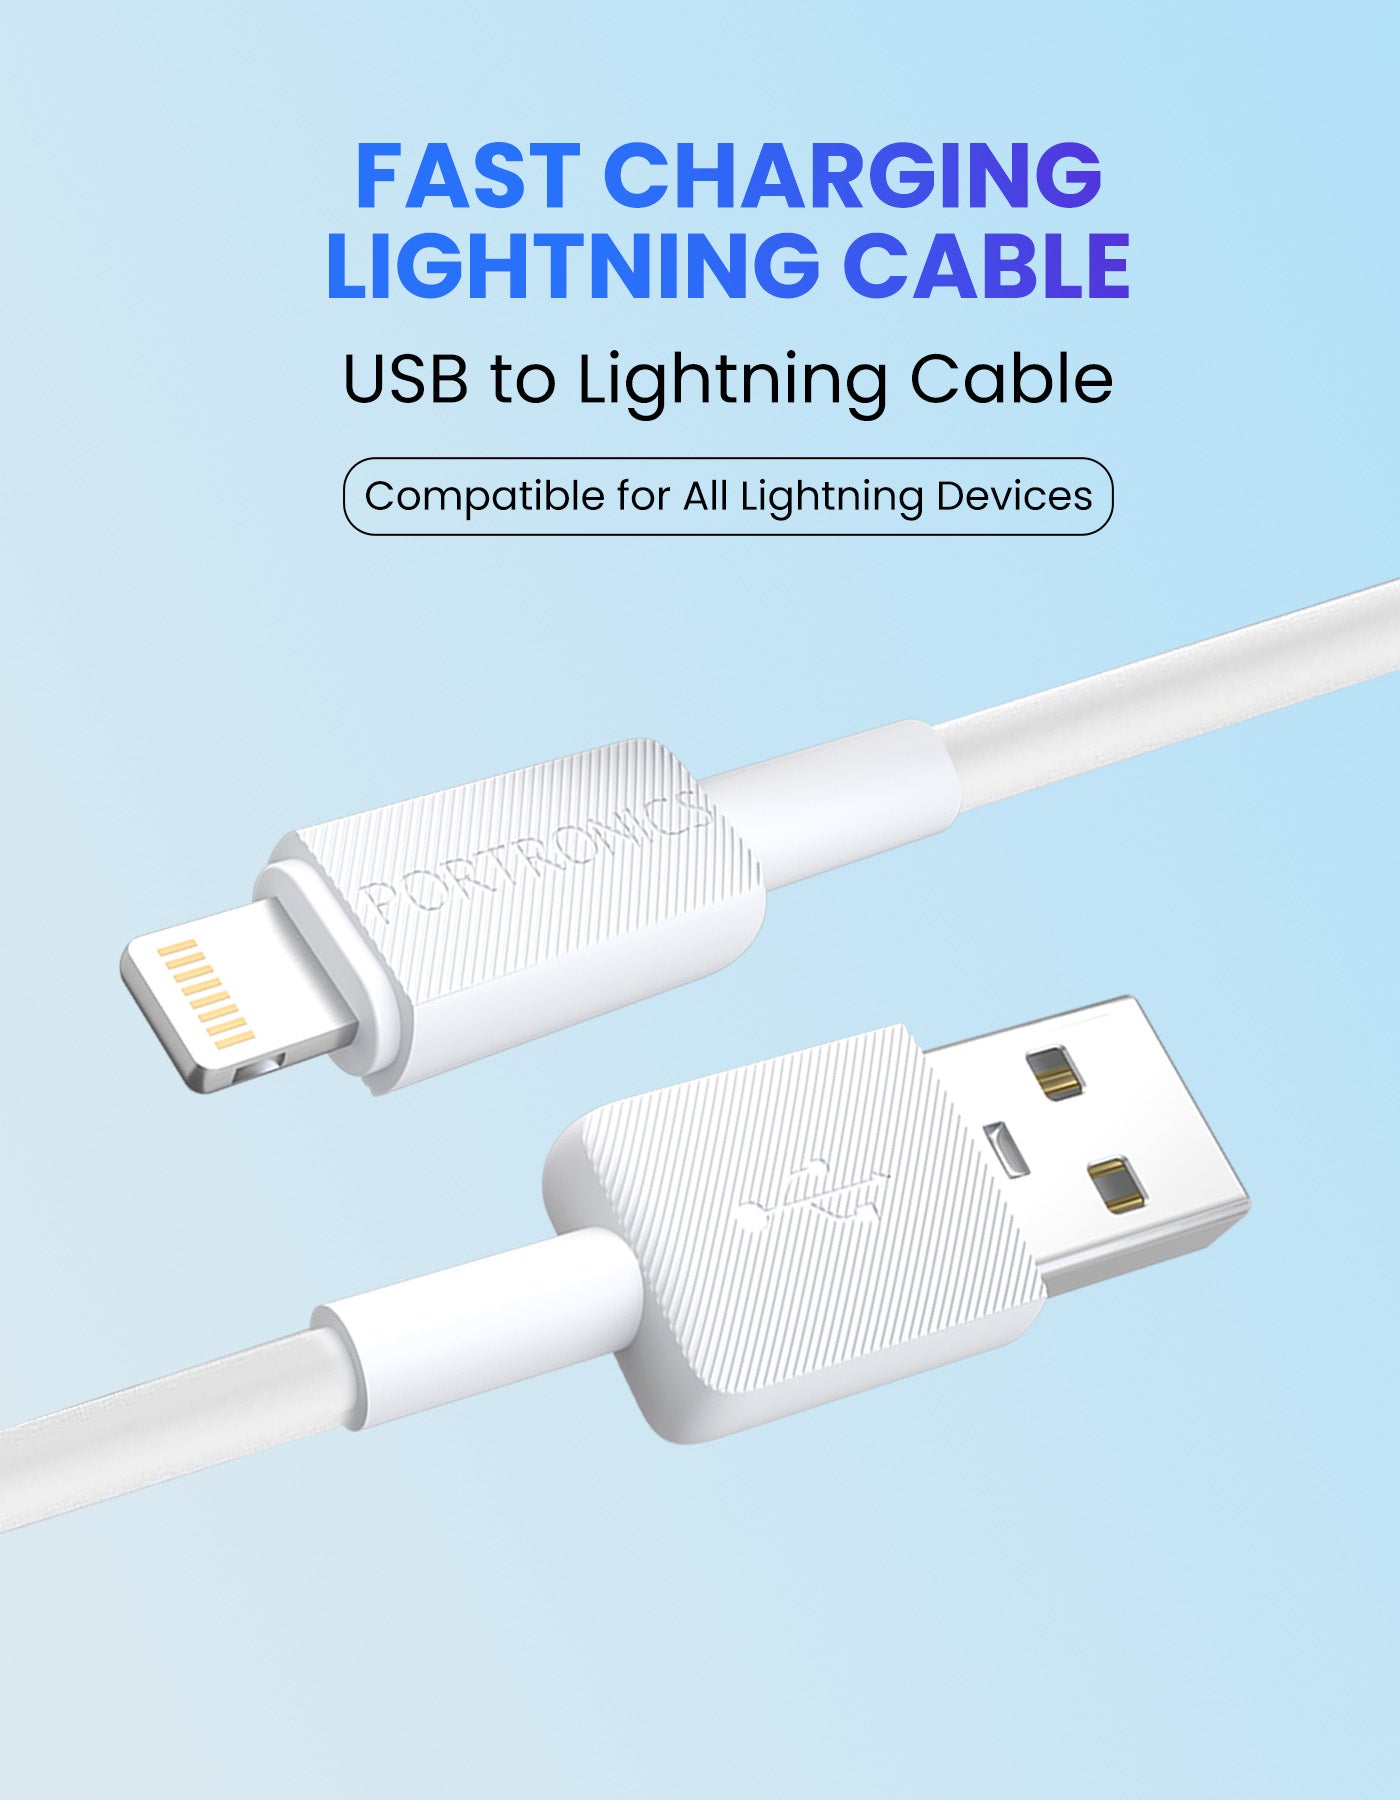 Portronics Konnect Link - 8 pin Fast charging Cable for Iphone| fast charging lighting cable| usb cable for iphone